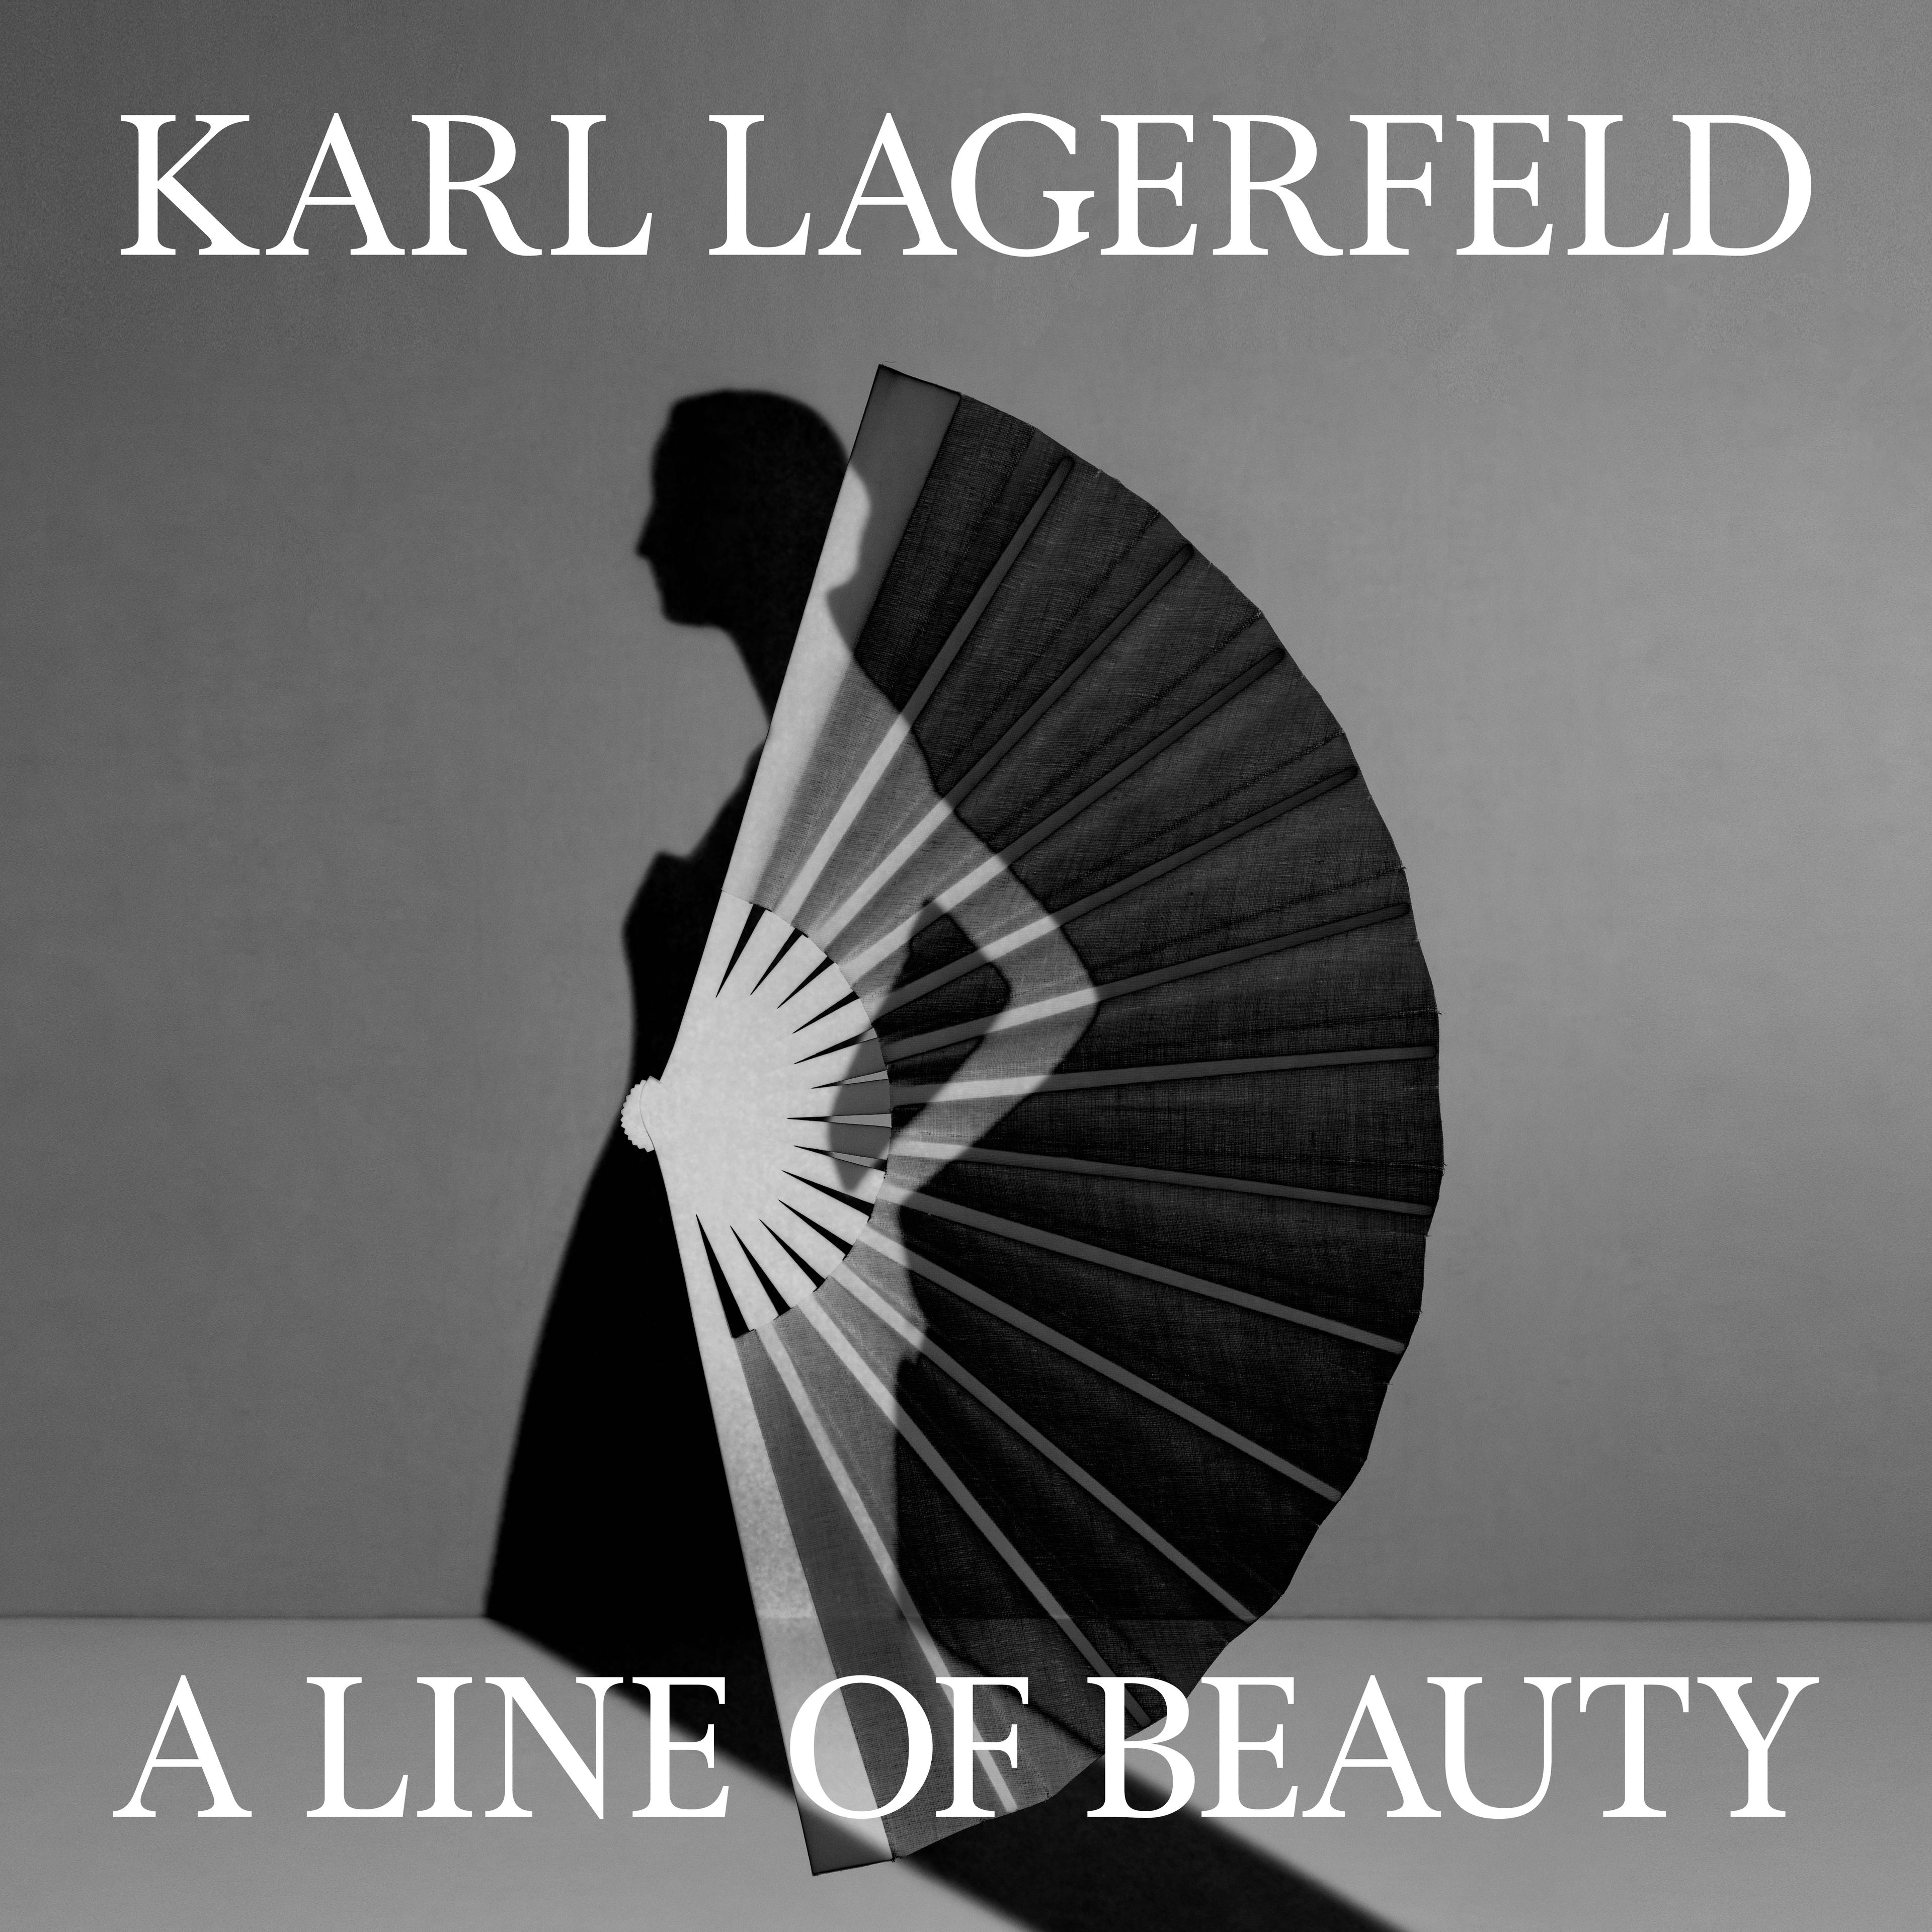 take a first look inside 'karl lagerfeld: a line of beauty' ahead